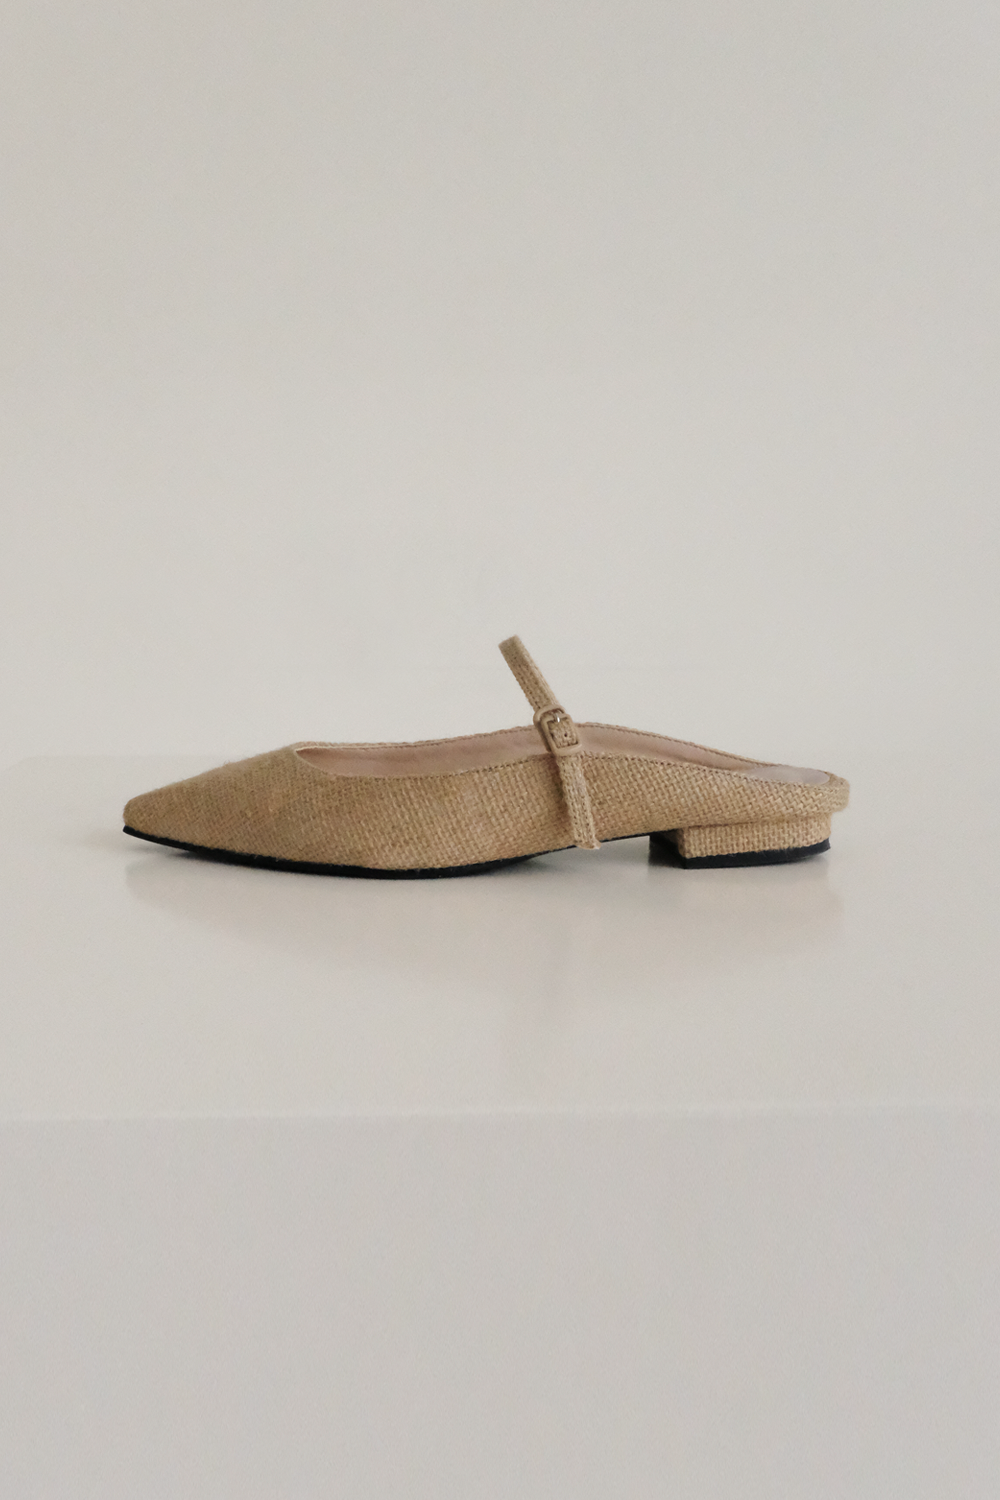 ANTHÈSE mary jane flat mule, linen natural (10%)